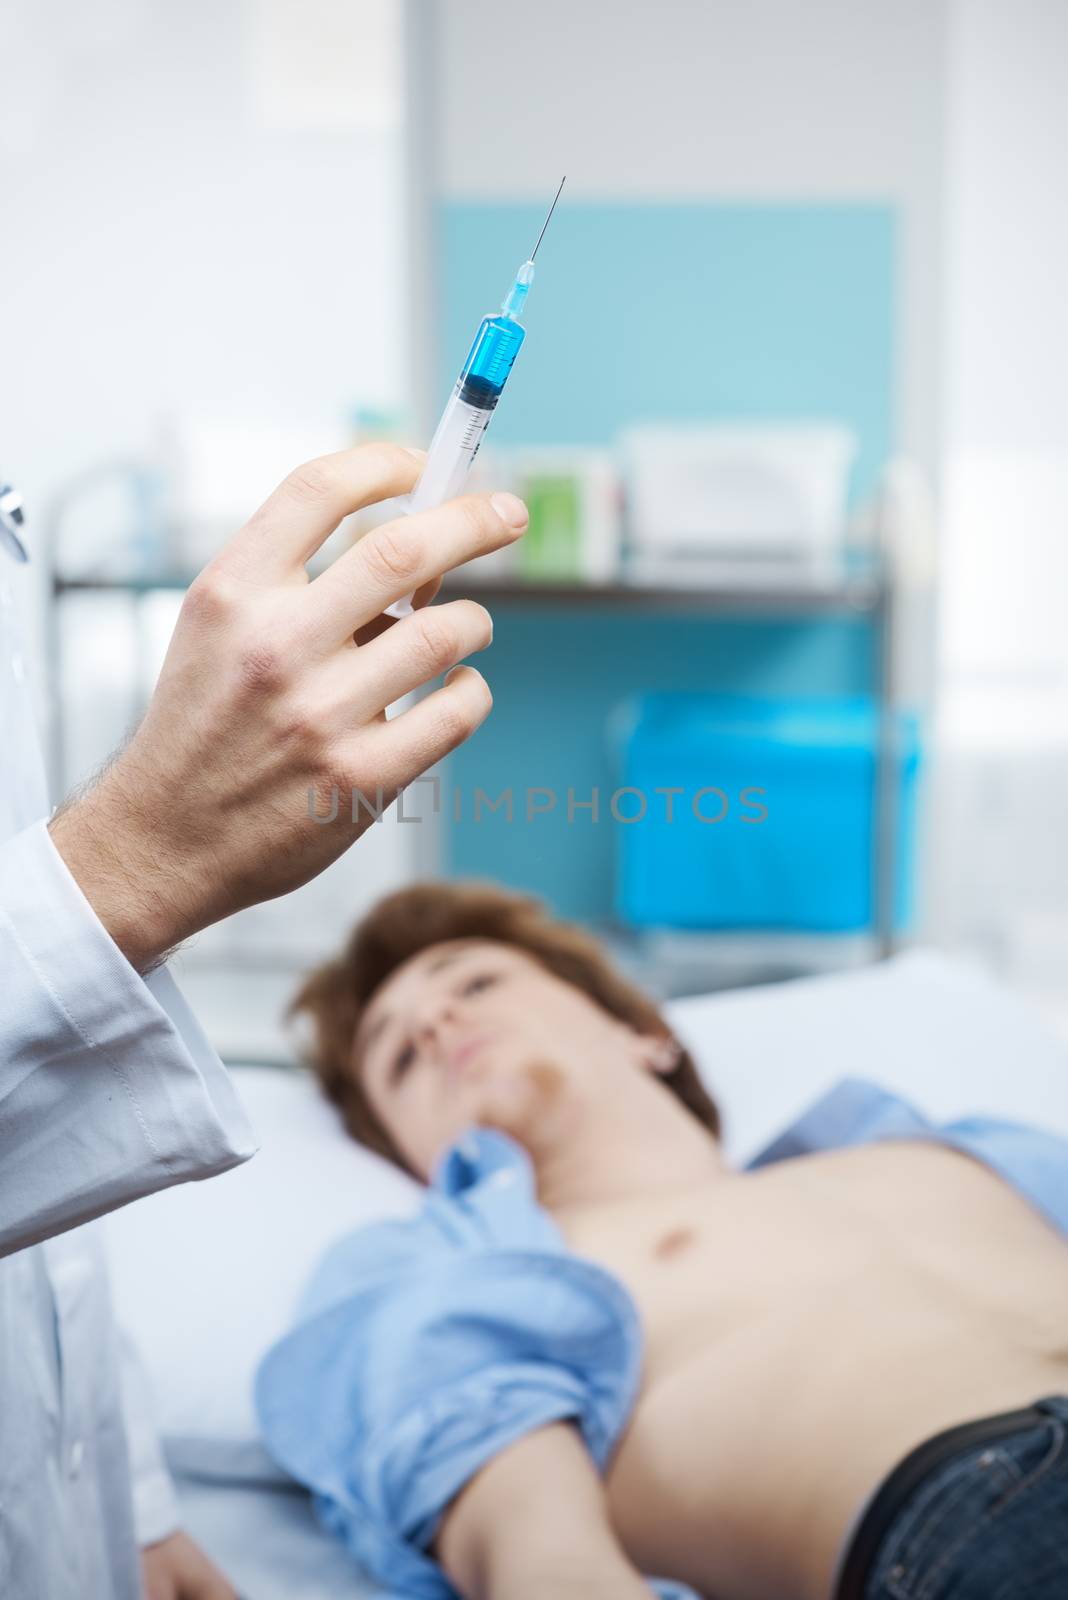 Doctor preparing a syringe for an injection with patient on the background.